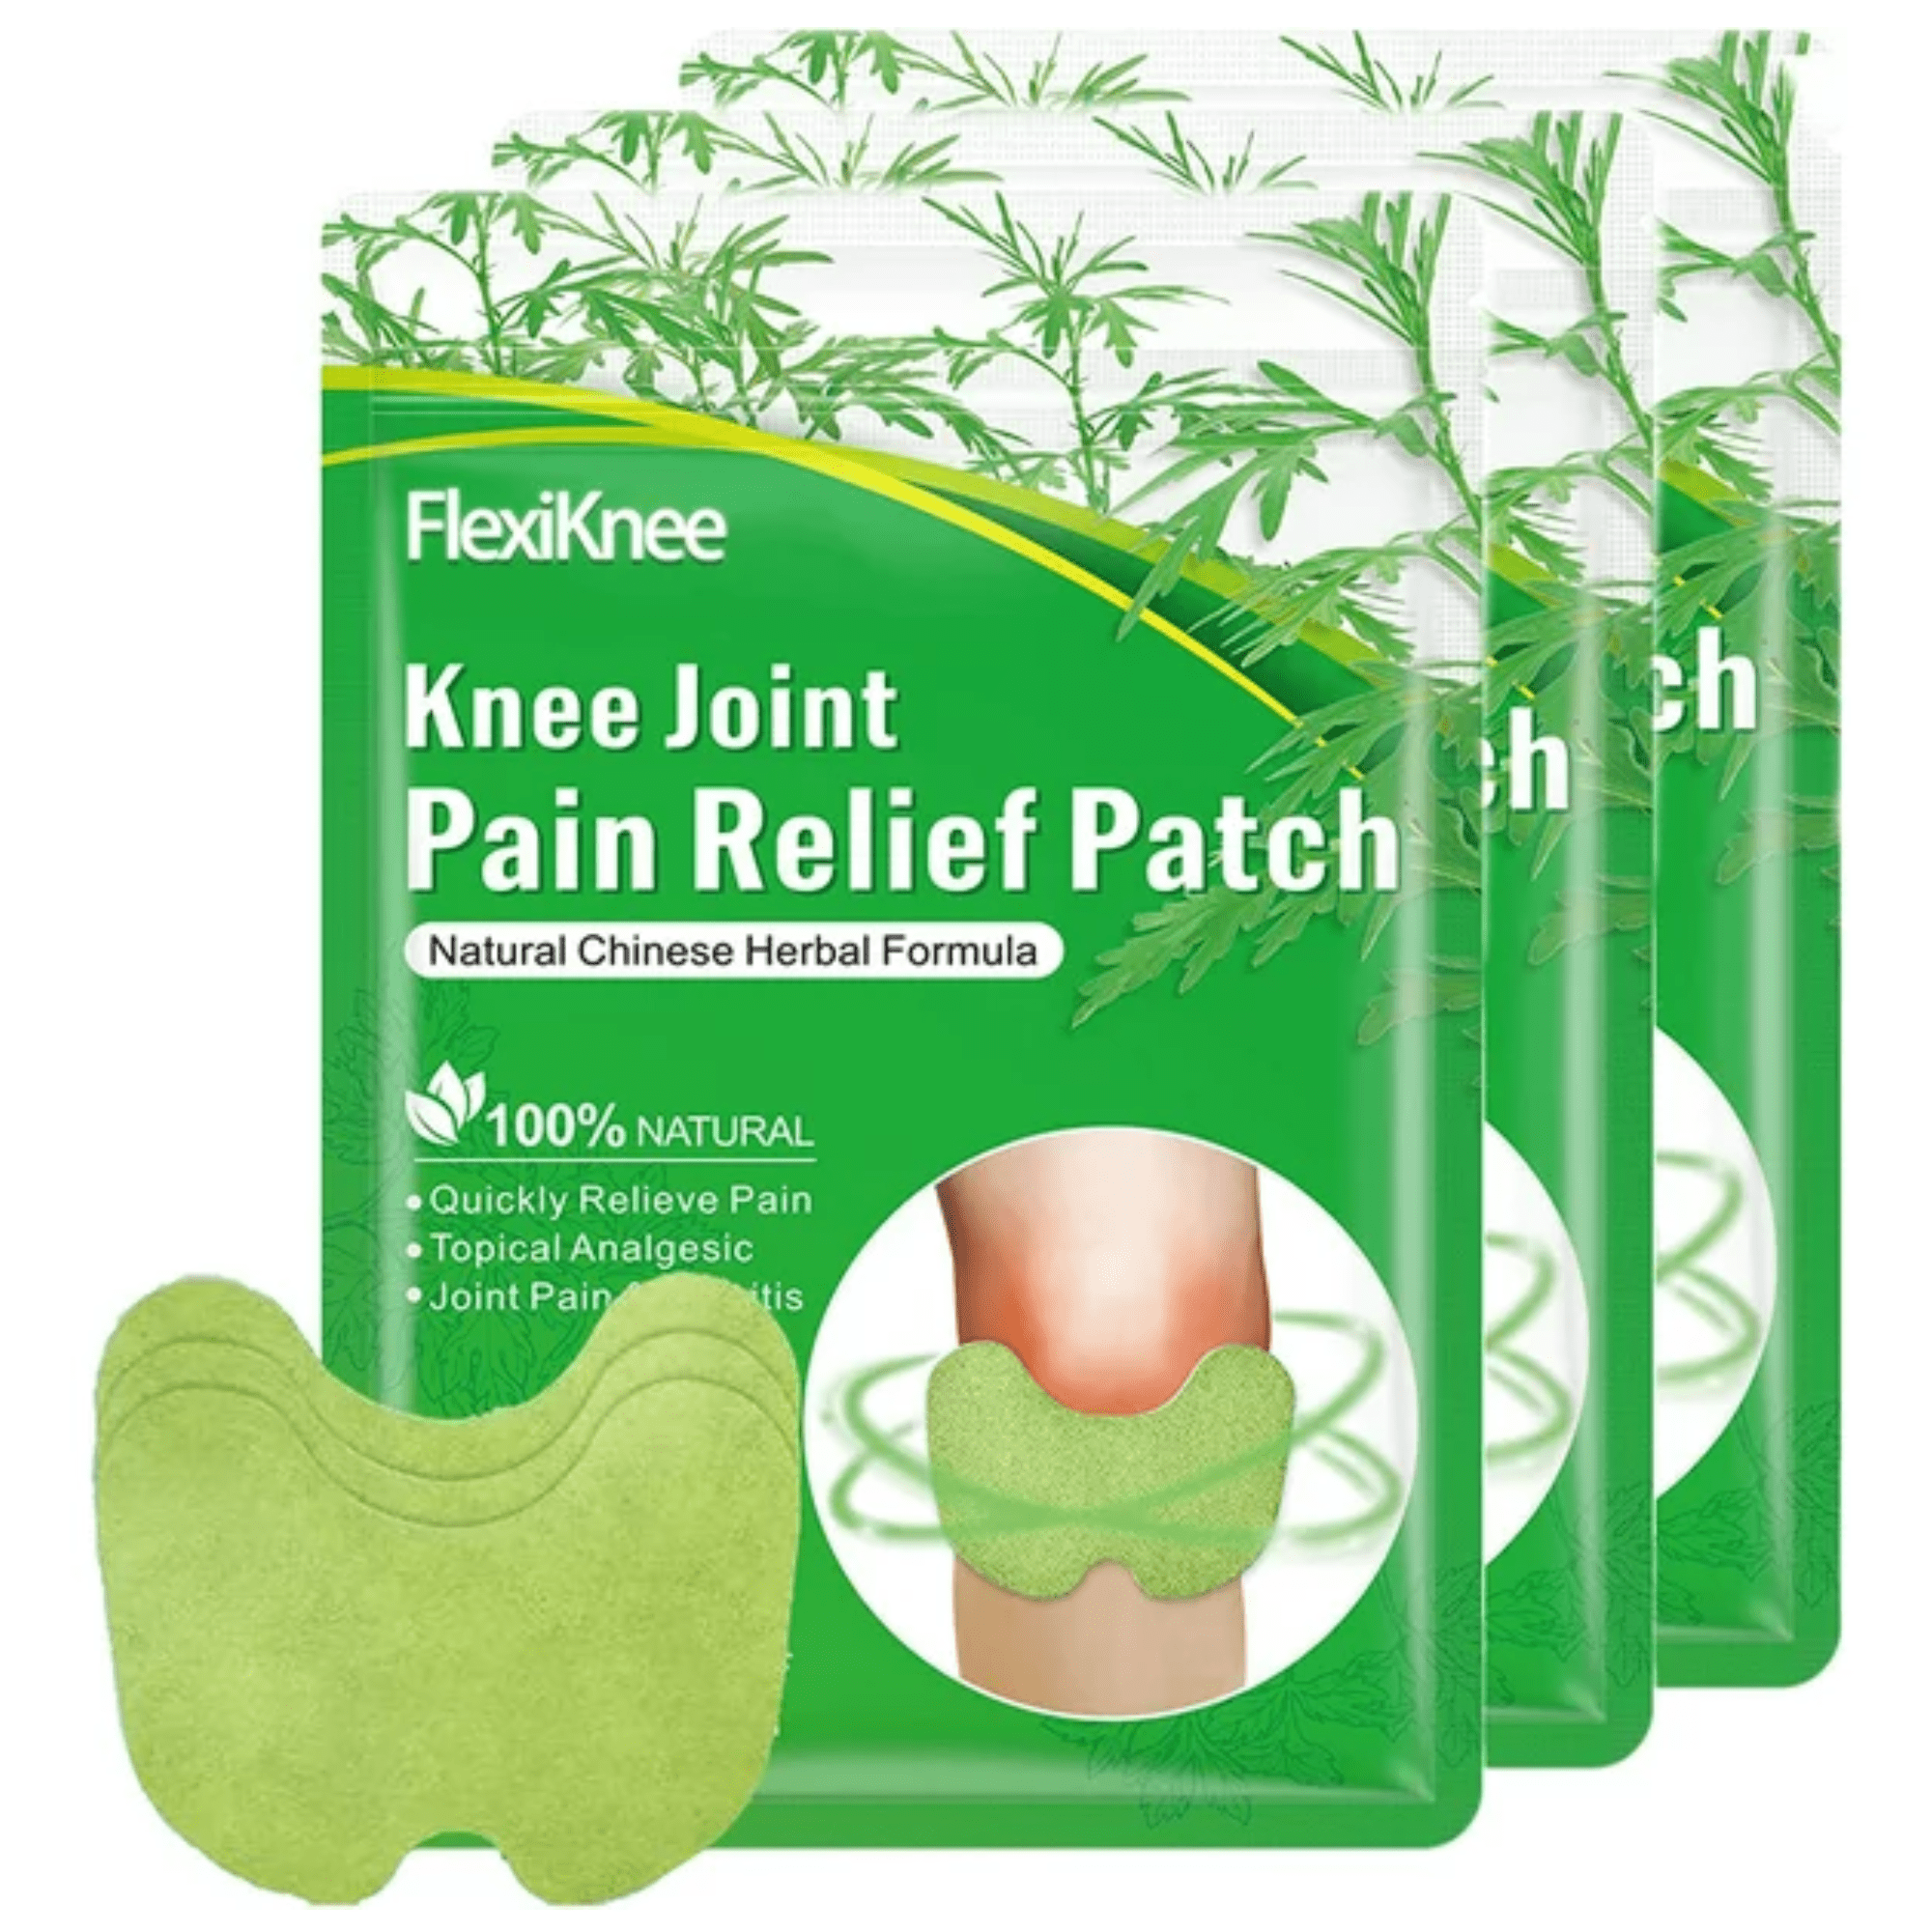 Flexiknee-Natural-Knee-Pain-Patch-Flexiknee-Knee-Joint-Pain-Relief-Patchs-Herbal-Knee-Patches-for-Pain-Relief-36Pcs